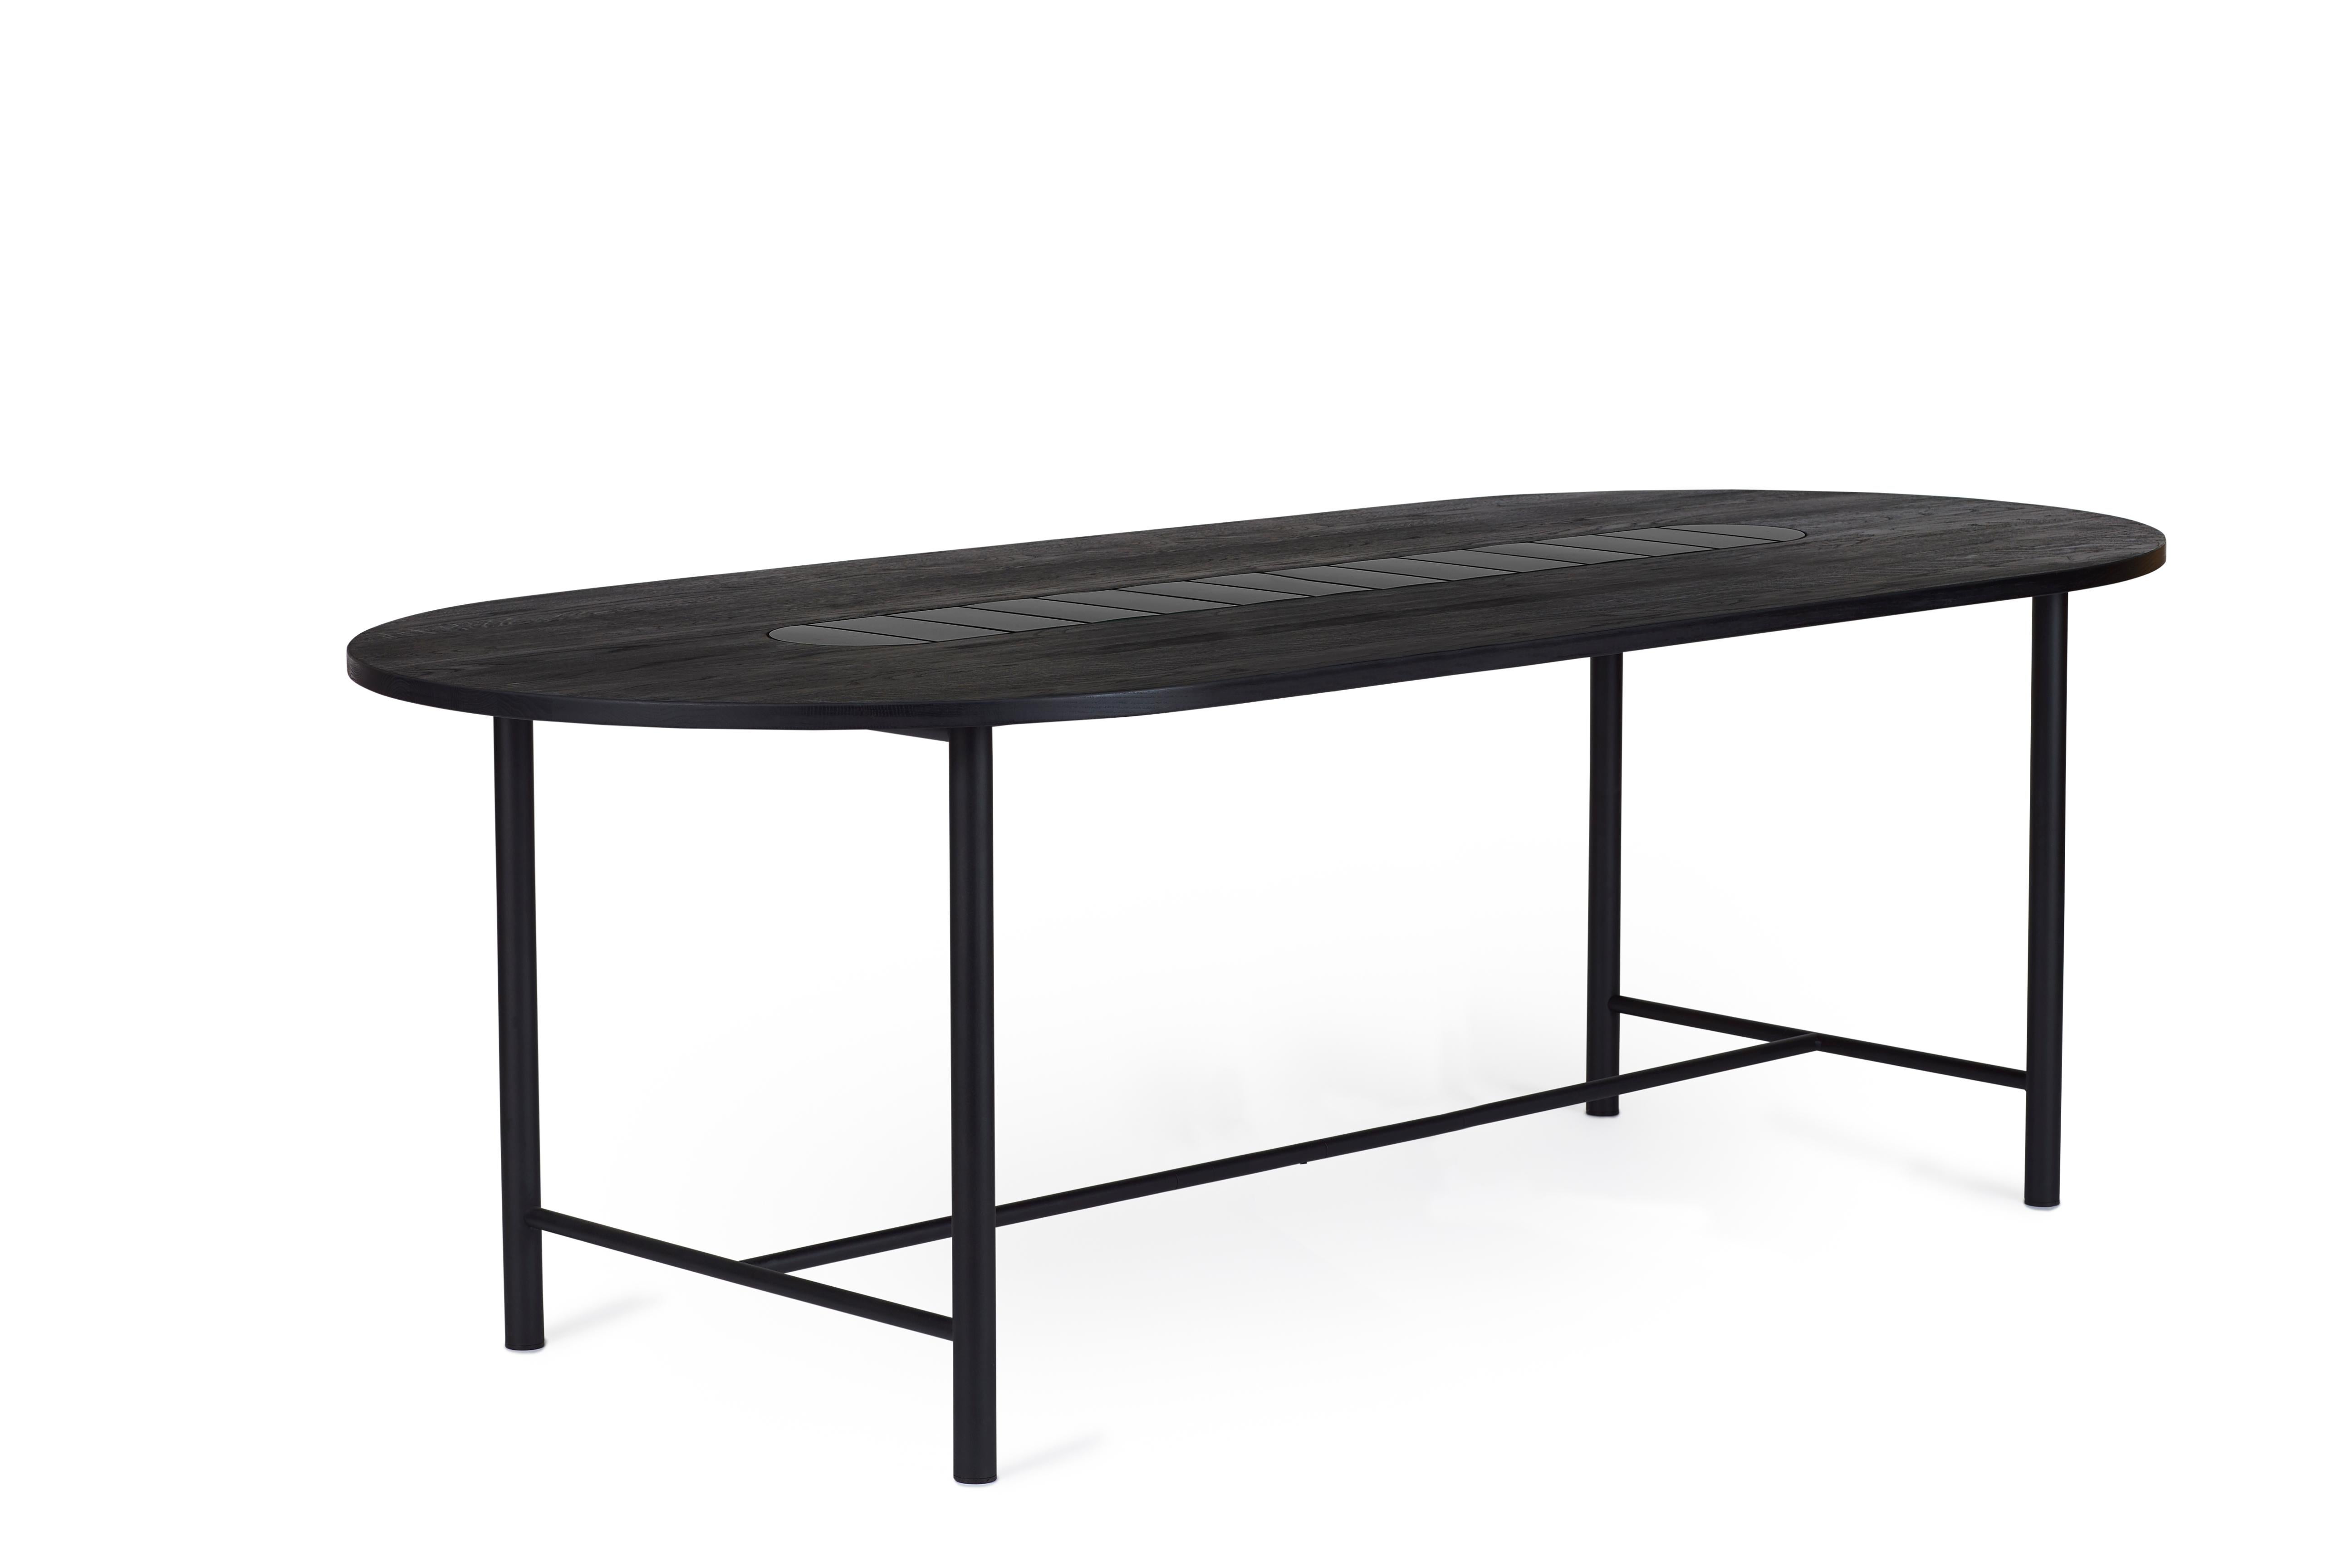 For Sale: Black (Soft black) Be My Guest Large Dining Table, by Charlotte Høncke from Warm Nordic 2